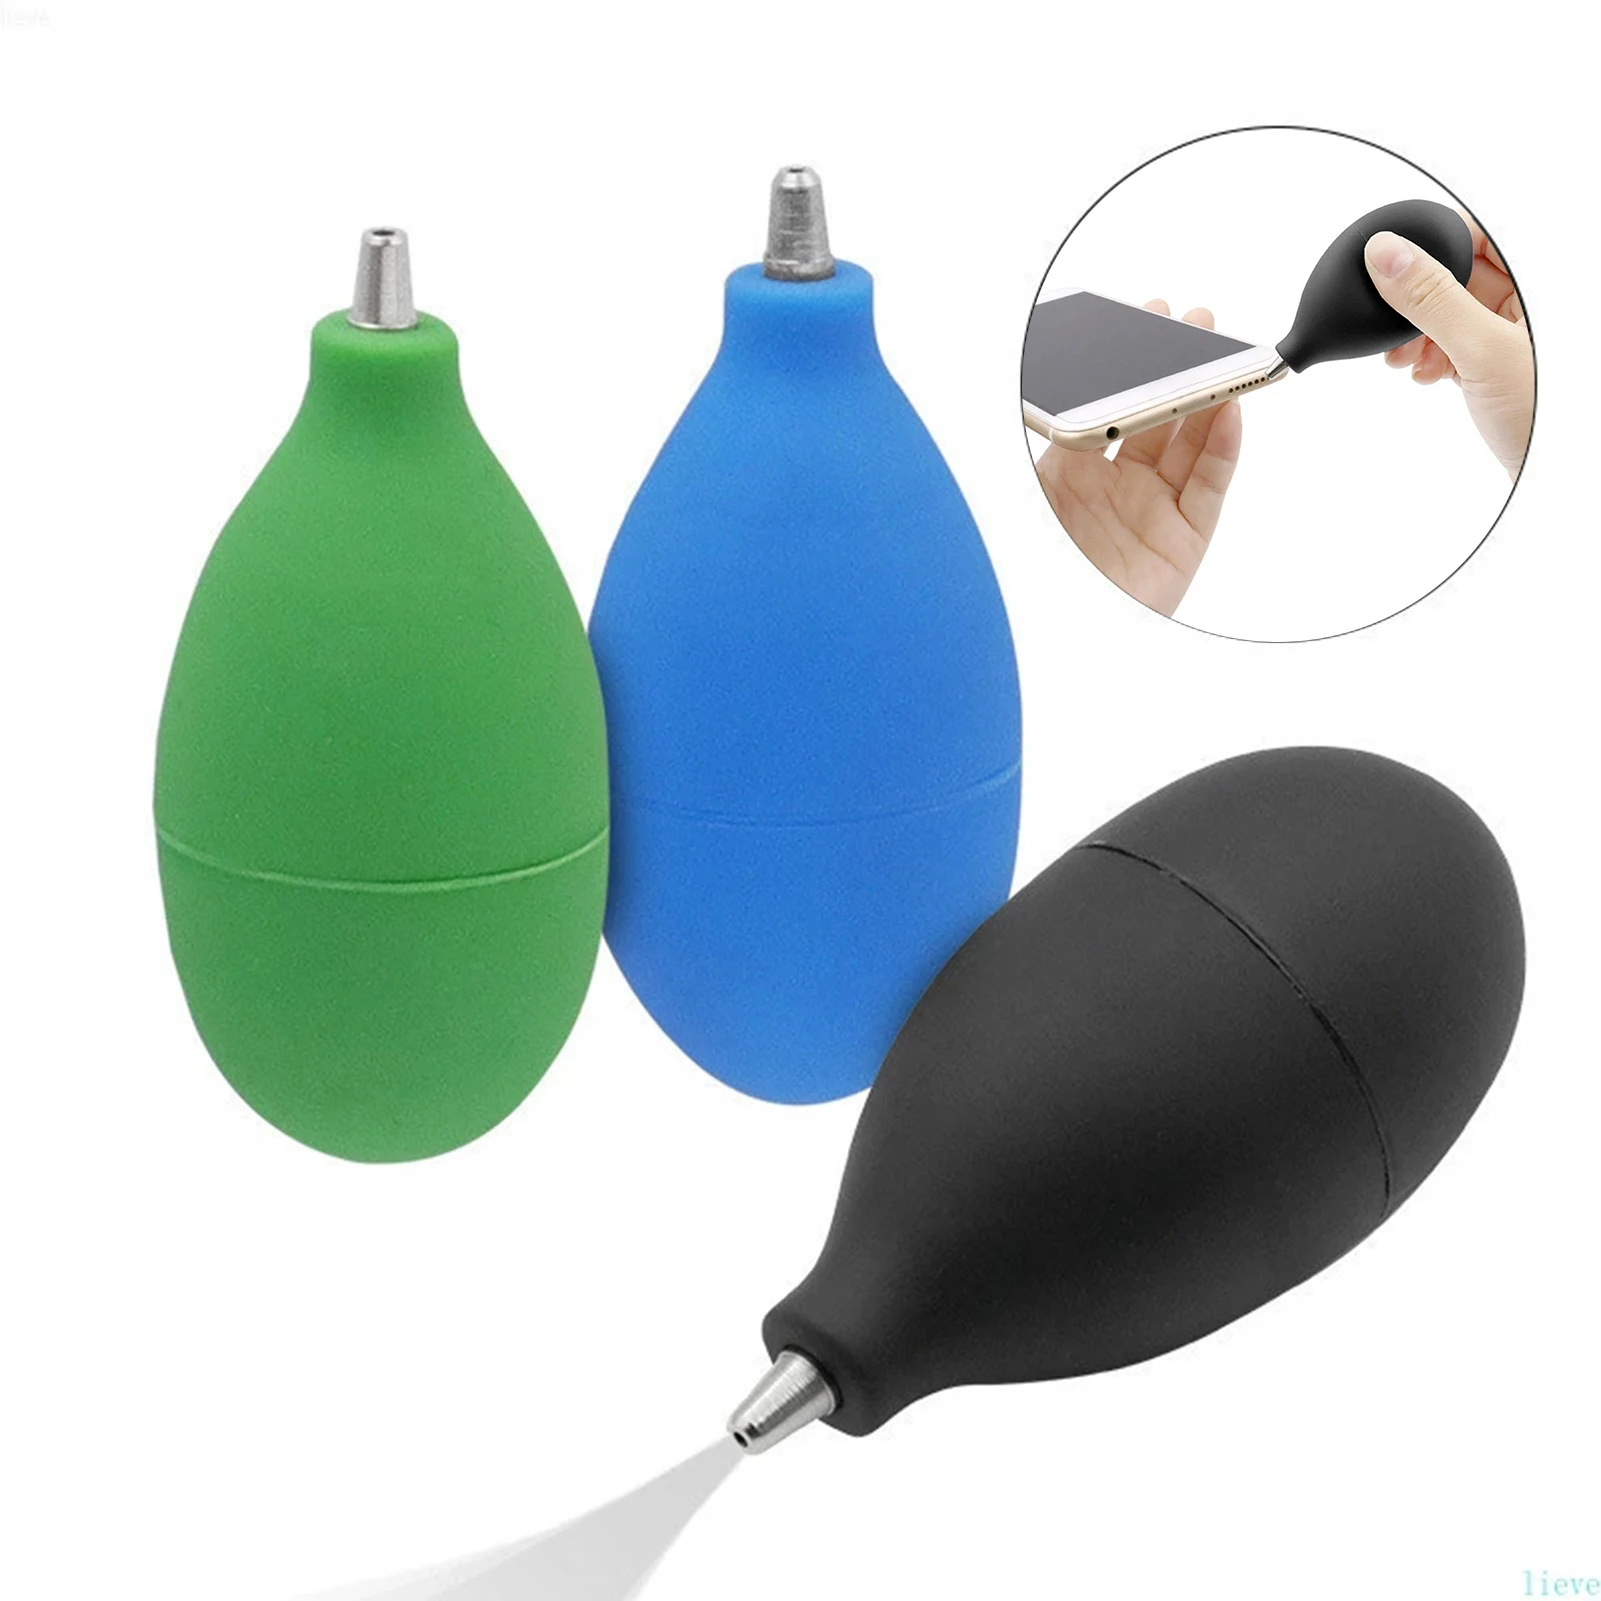 

Dust Blower Super Strong Dust Blowing Air Blaster Pump Mini Handheld Air Duster Dust Cleaning Remover For Home Office Electronic